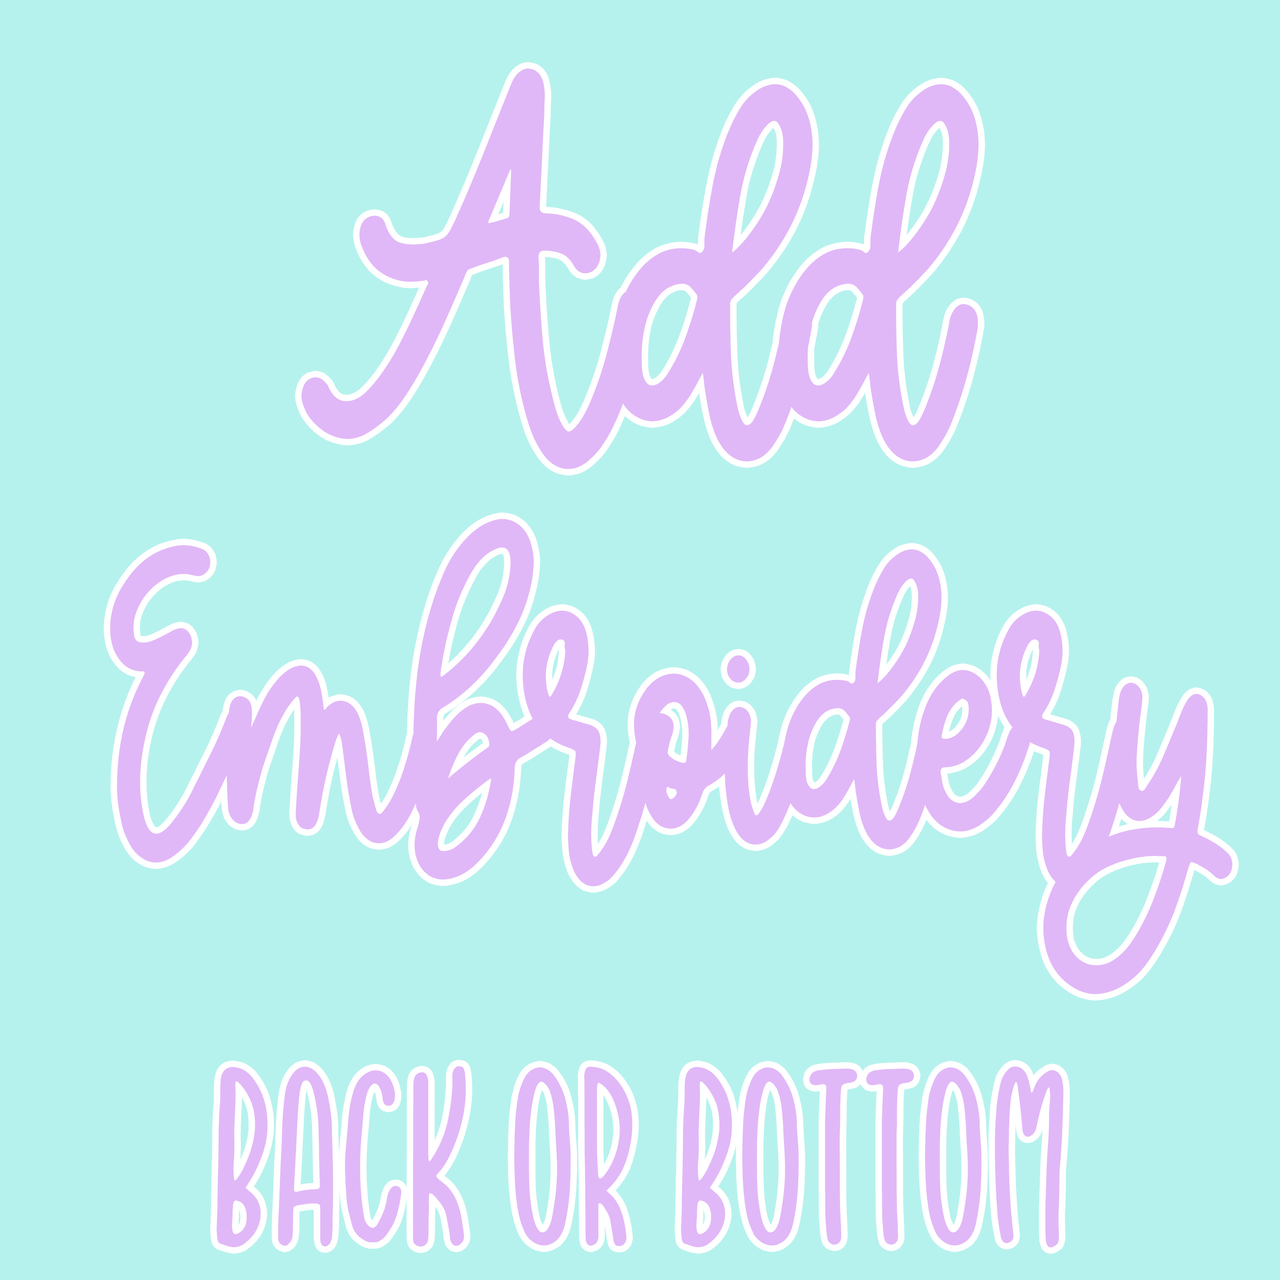 .Add Embroidery to back or bottom - Little Elska